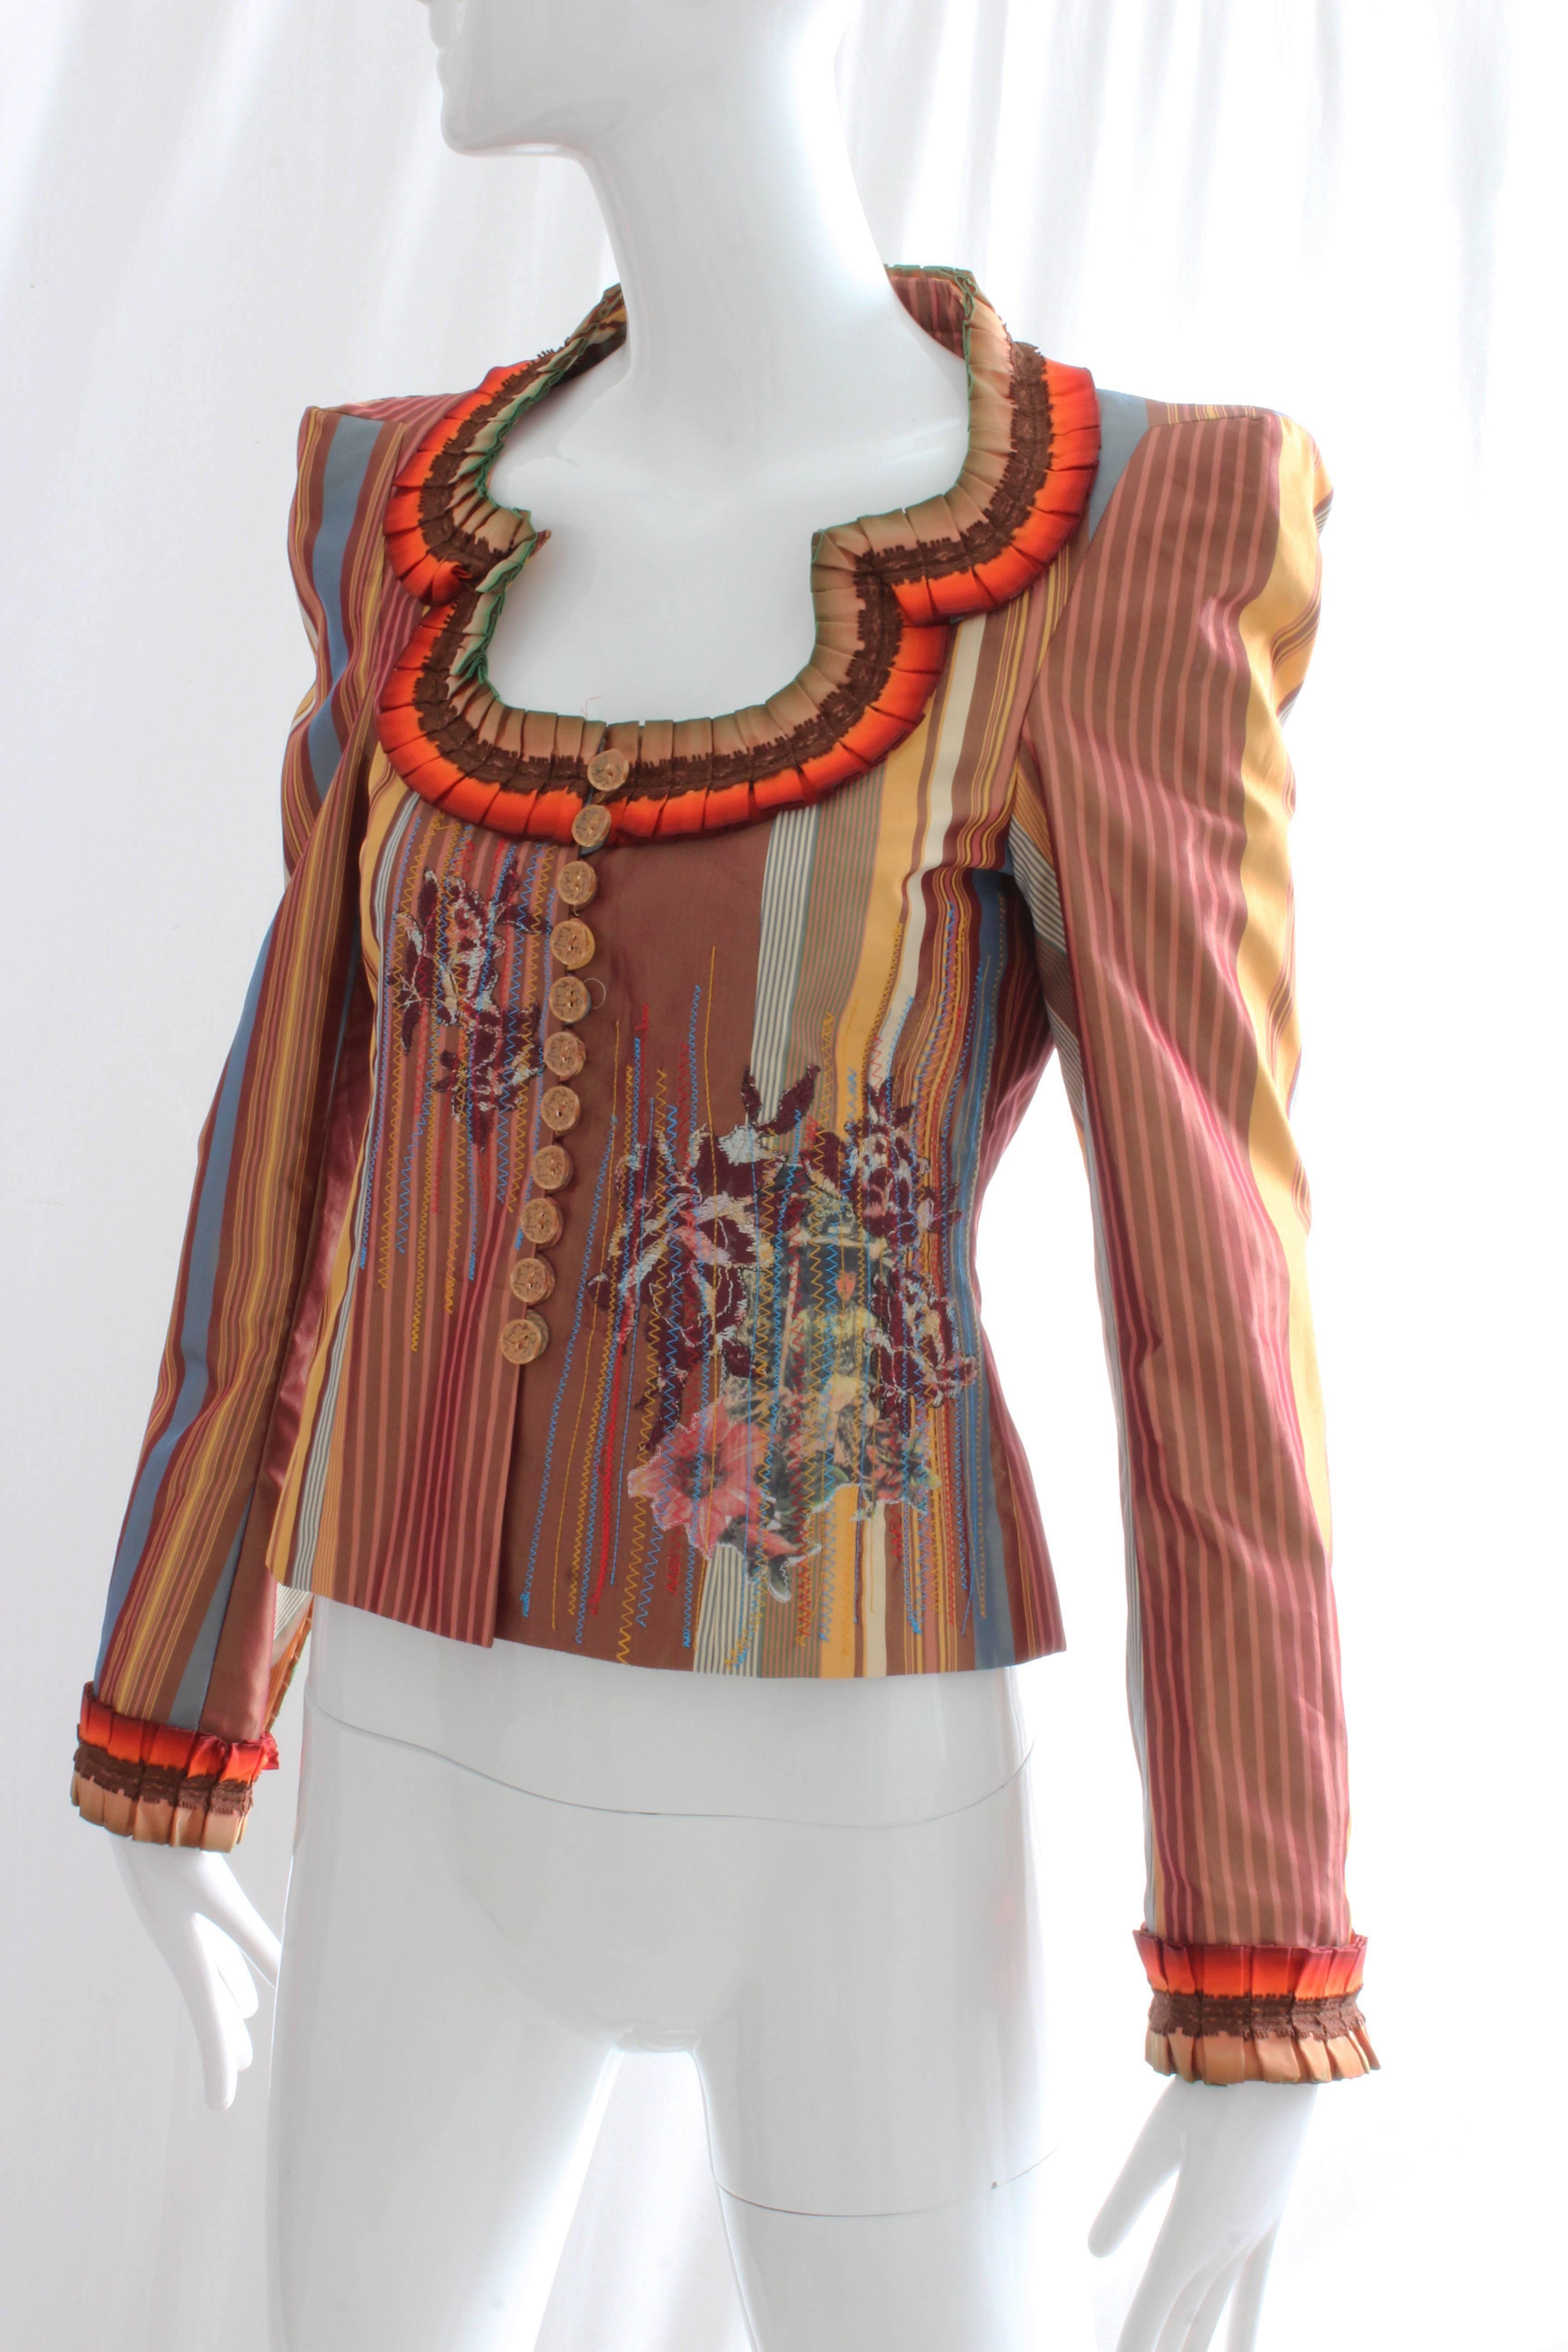 Brown Christian Lacroix Silk Jacket with Stripes, Tapestry + Ruffles New Tags sz36